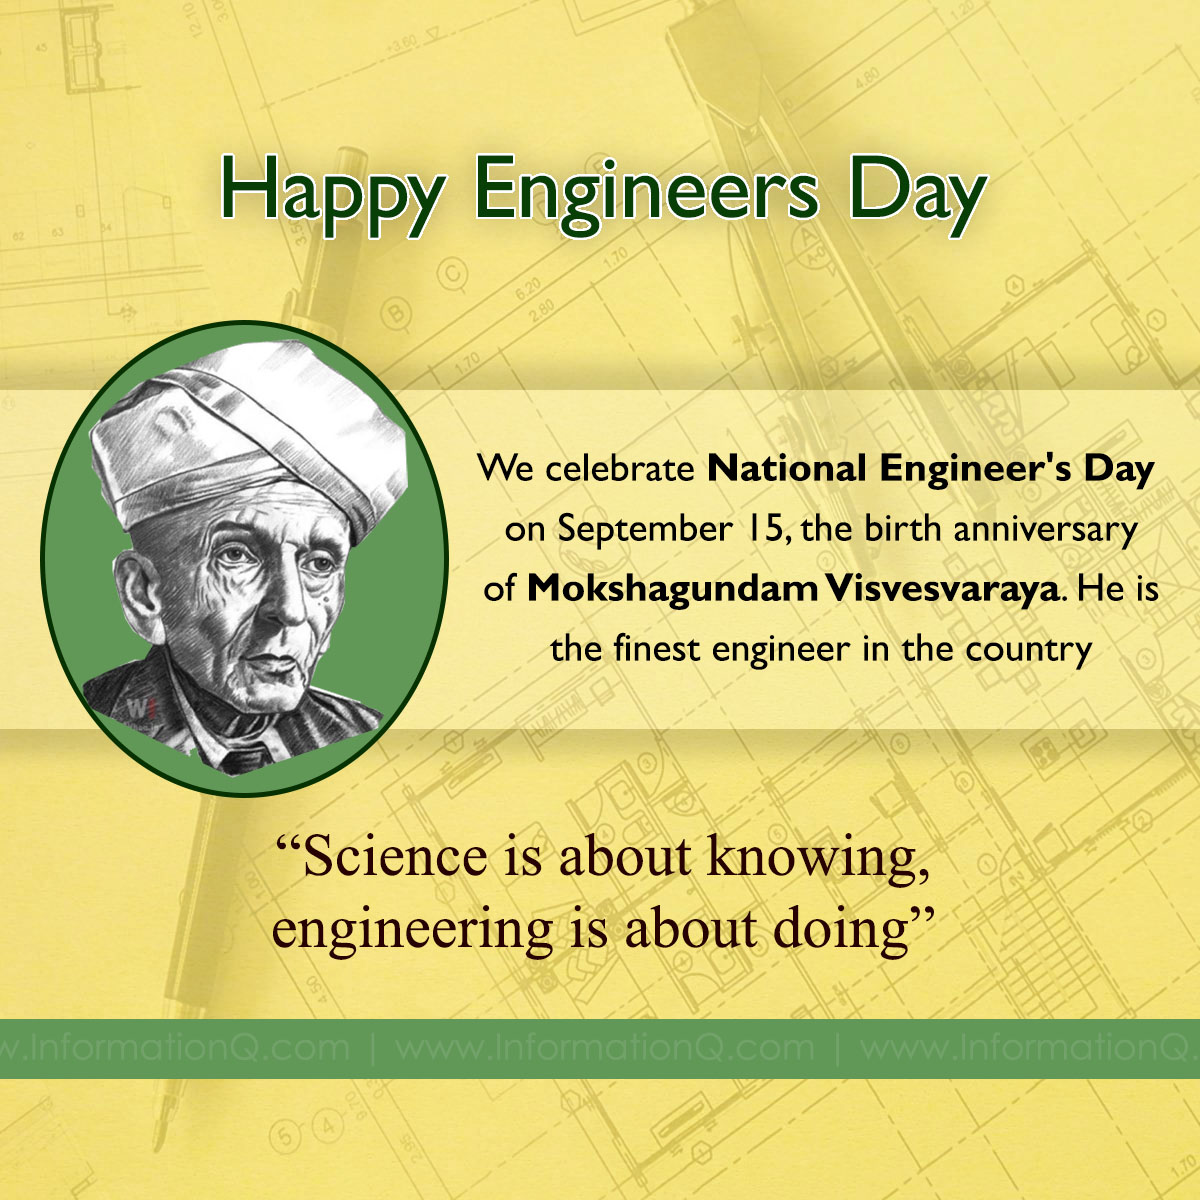 We sharing of ‘Happy Engineers Day’ wishes greeting images.